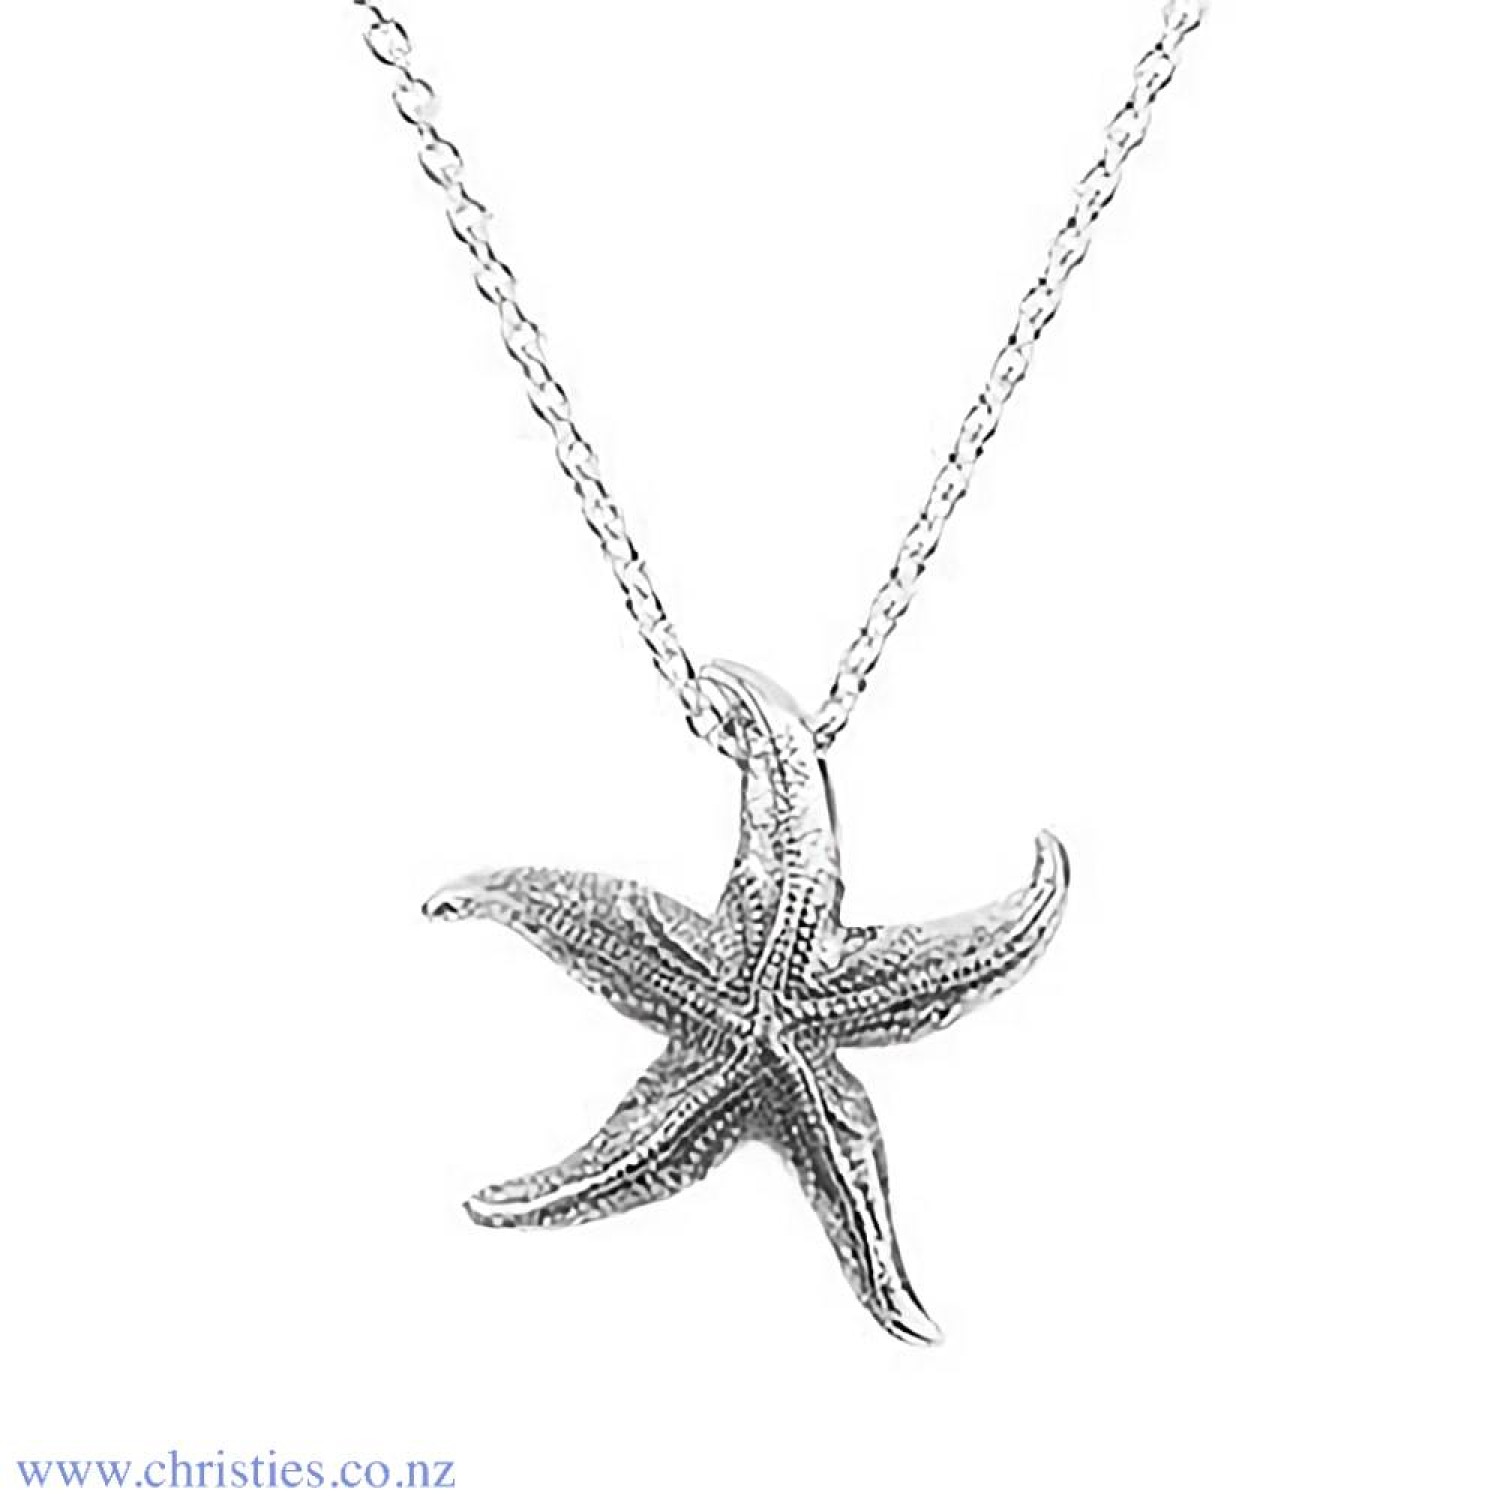 2P61012 Evolve Coastal Starﬁsh Silver Pendant. Evolves beautiful starﬁsh pendant reminds us of time spent with loved ones enjoying Aotearoa’s many beautiful beaches. The starﬁsh depicts the magic of true love, celebrating the deep affection and devotion i